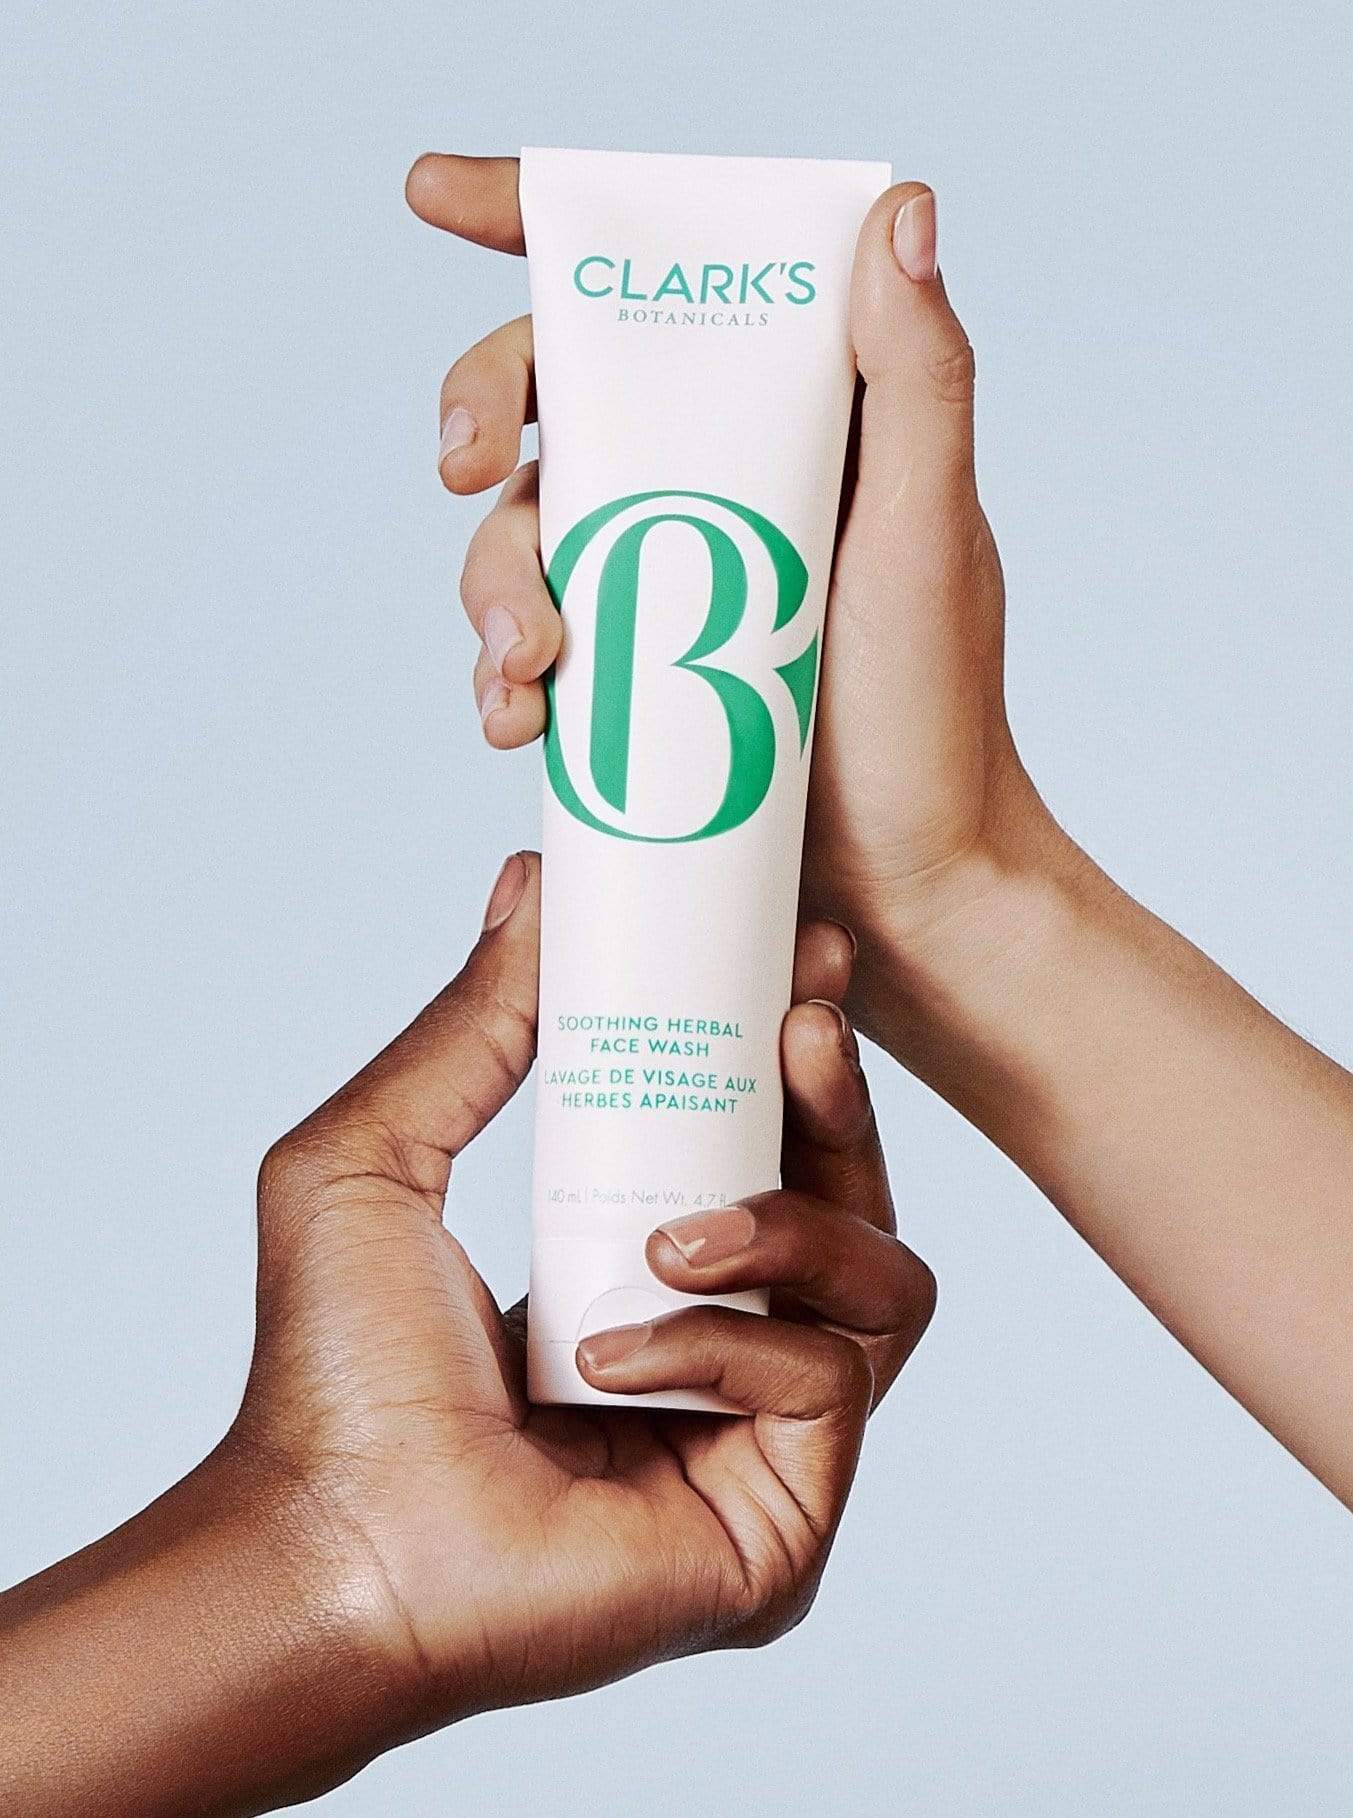 Clark's Botanicals Cleansers & Scrubs Soothing Herbal Face Wash